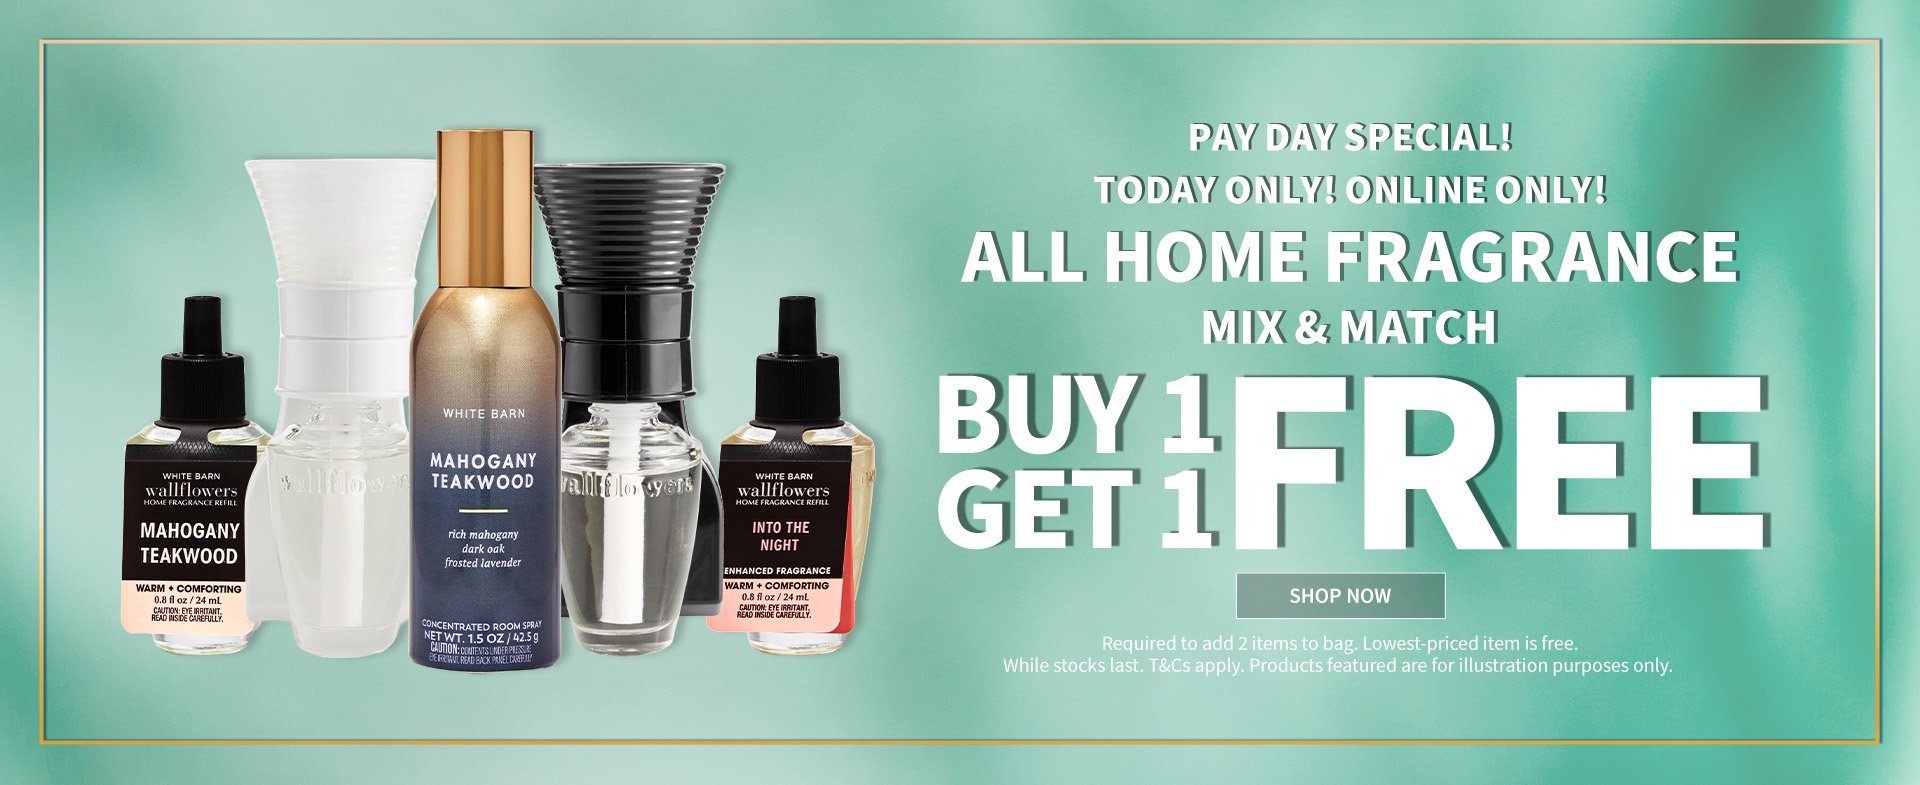 PAY DAY SPECIAL! TODAY ONLY! ONLINE ONLY! ALL HOME FRAGRANCE MIX & MATCH B1G1F